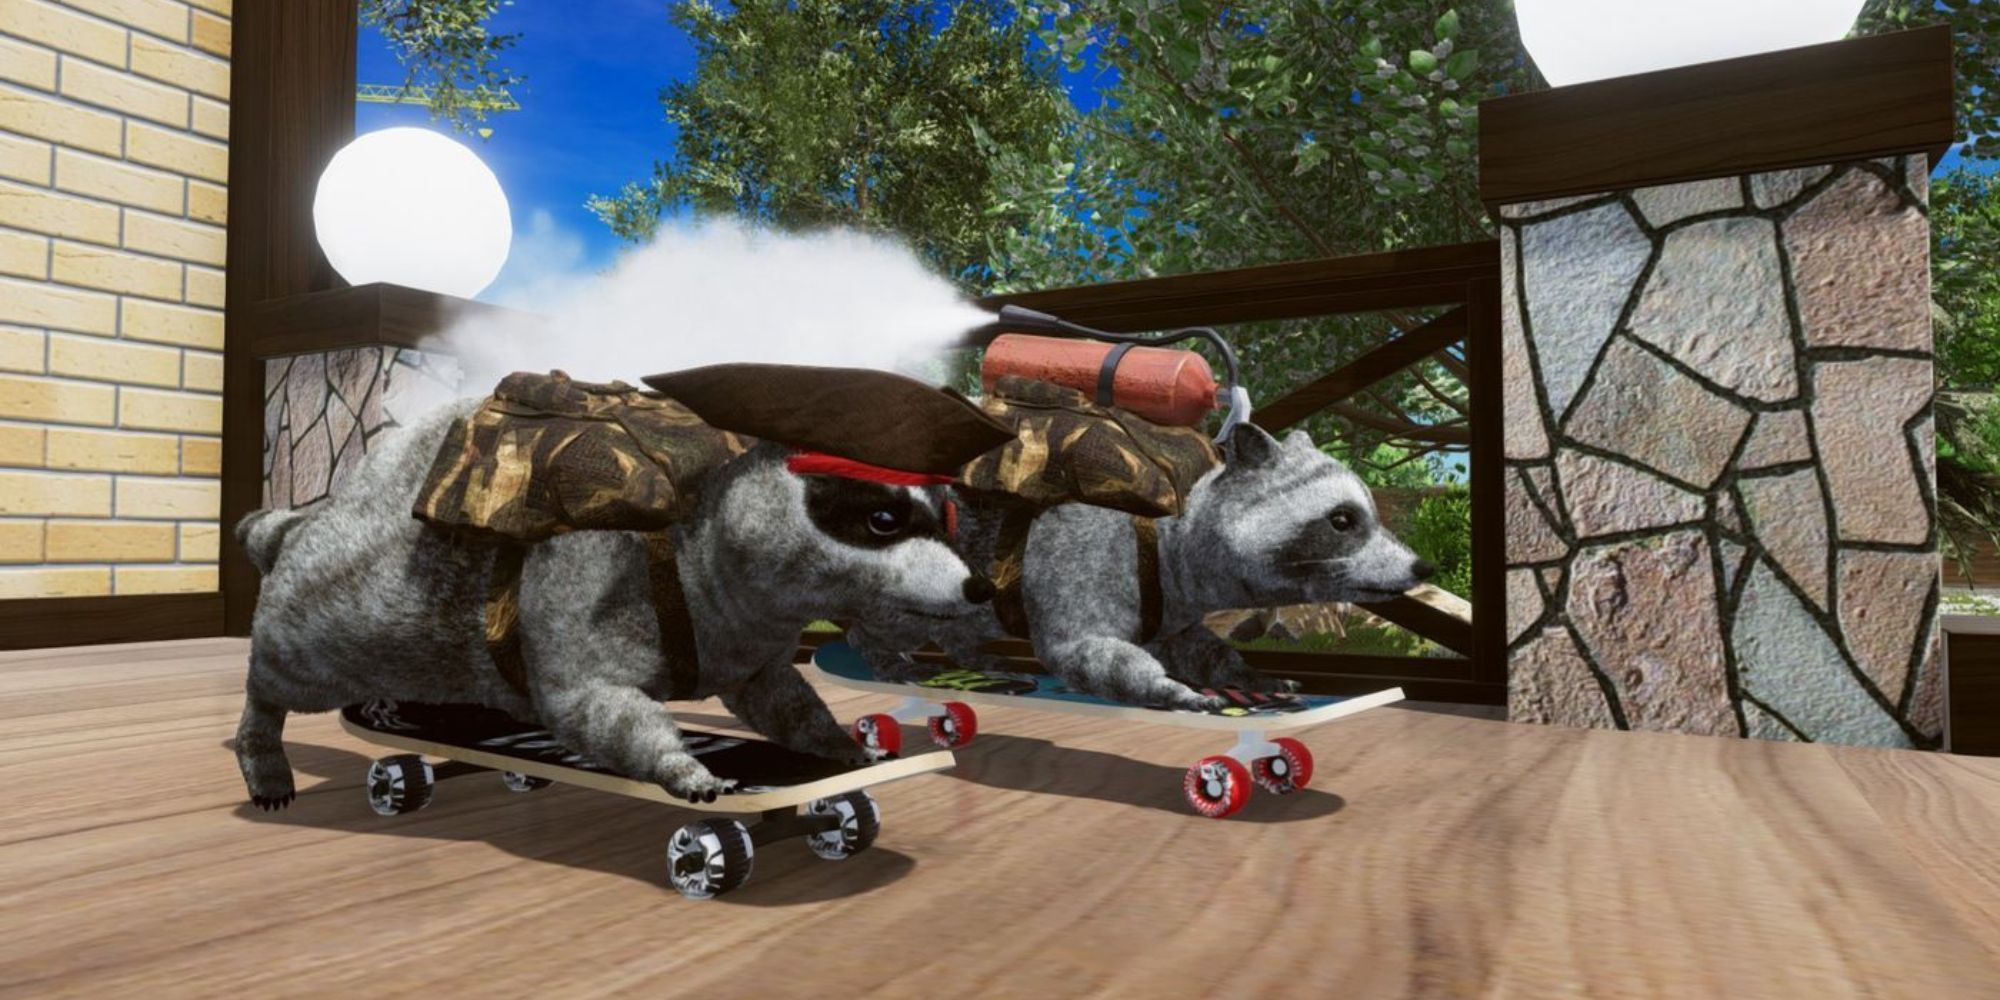 The player and an NPC raccoon dressed up on skateboards about to race in Wanted Raccoon